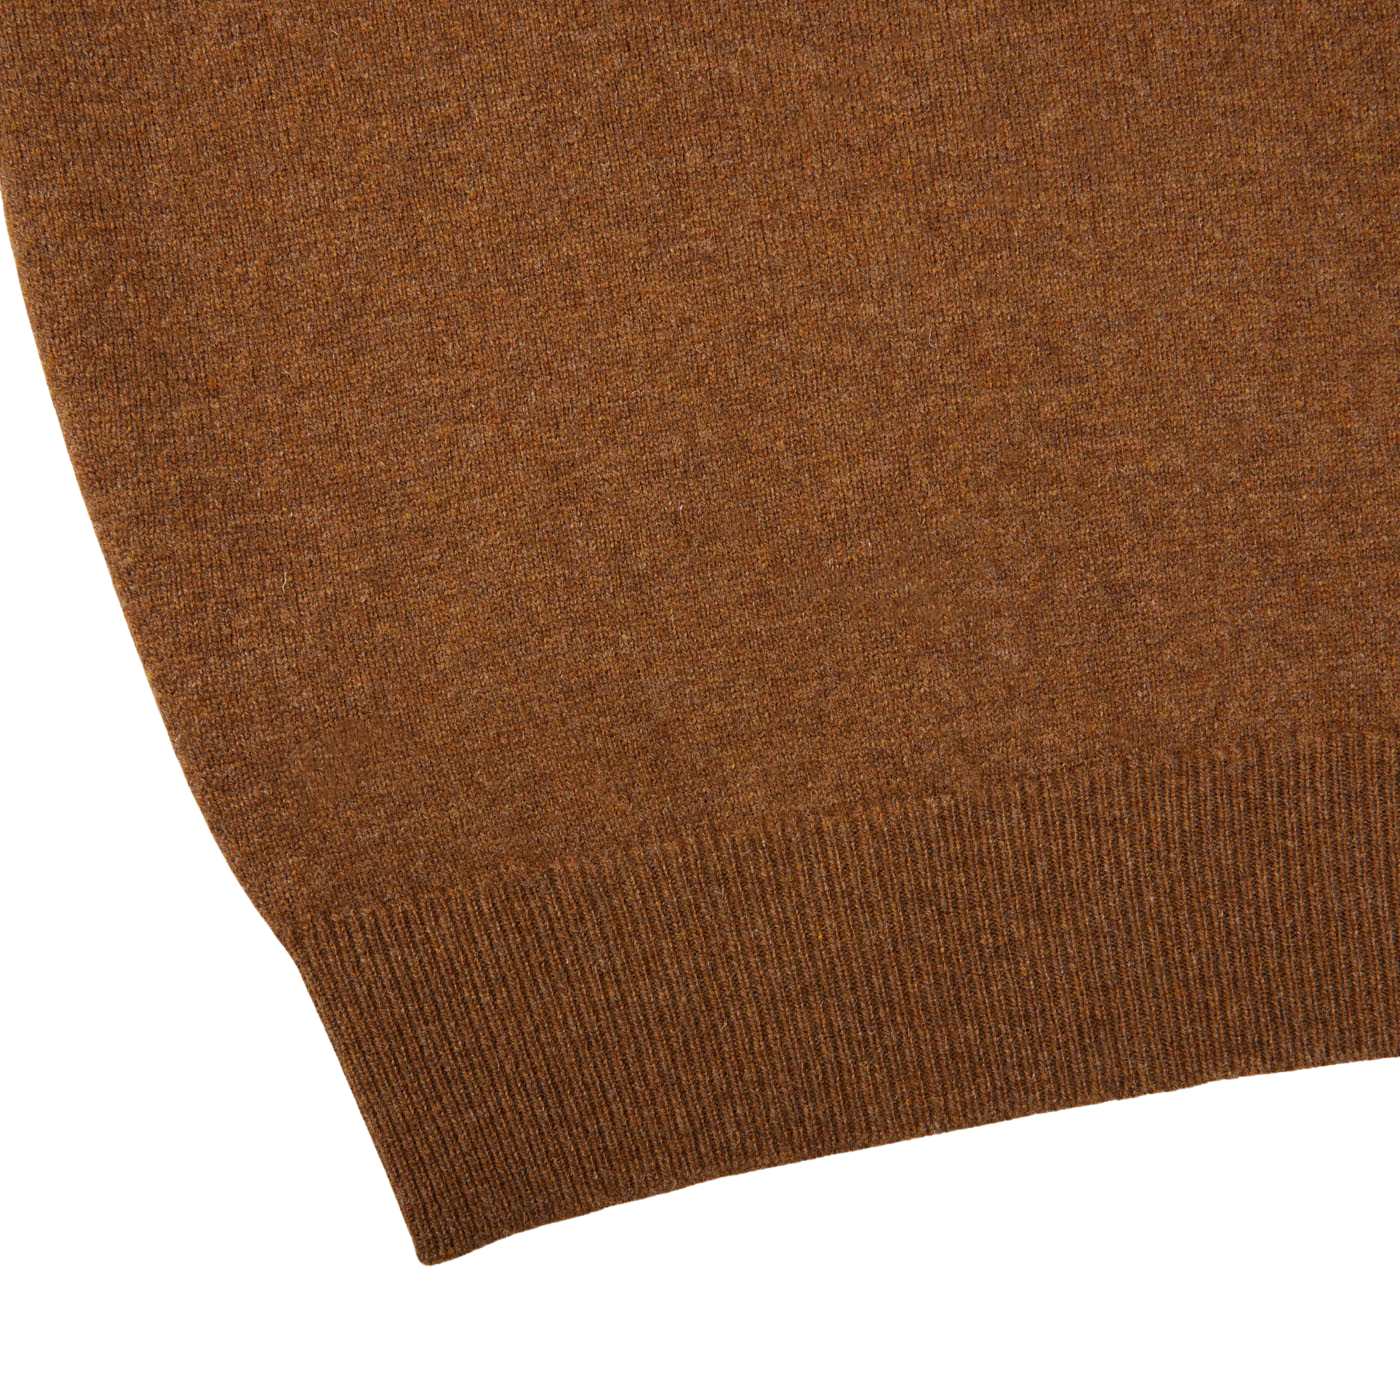 A close up of a William Lockie Kestrel Brown Deep V-Neck Lambswool Sweater on a white surface.